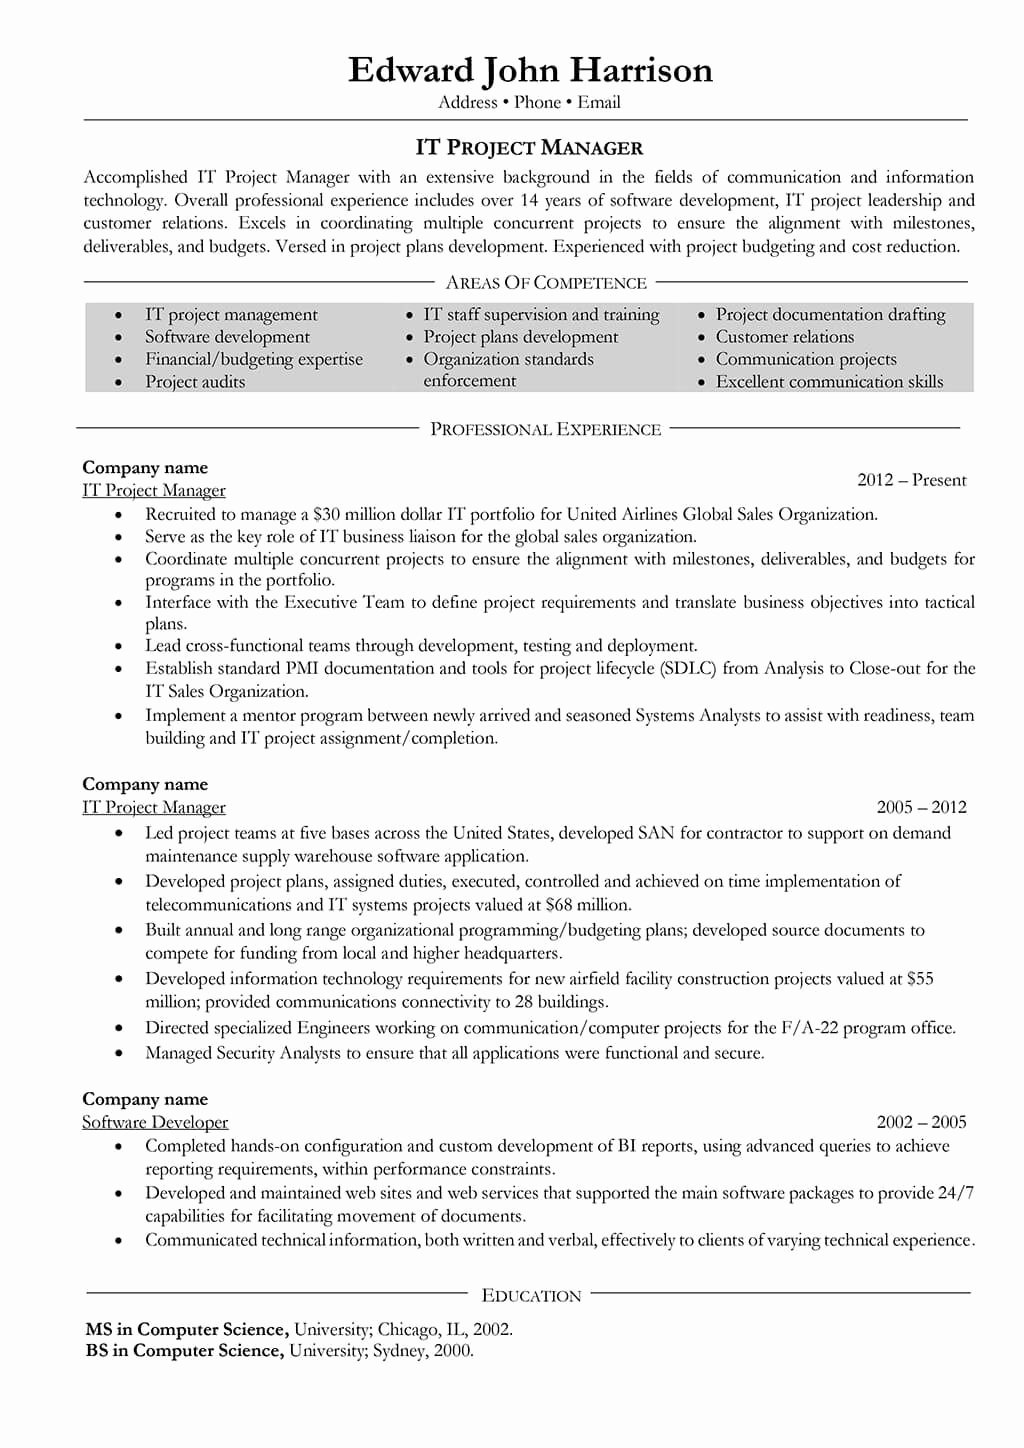 Sample Resume for Project Manager It software India